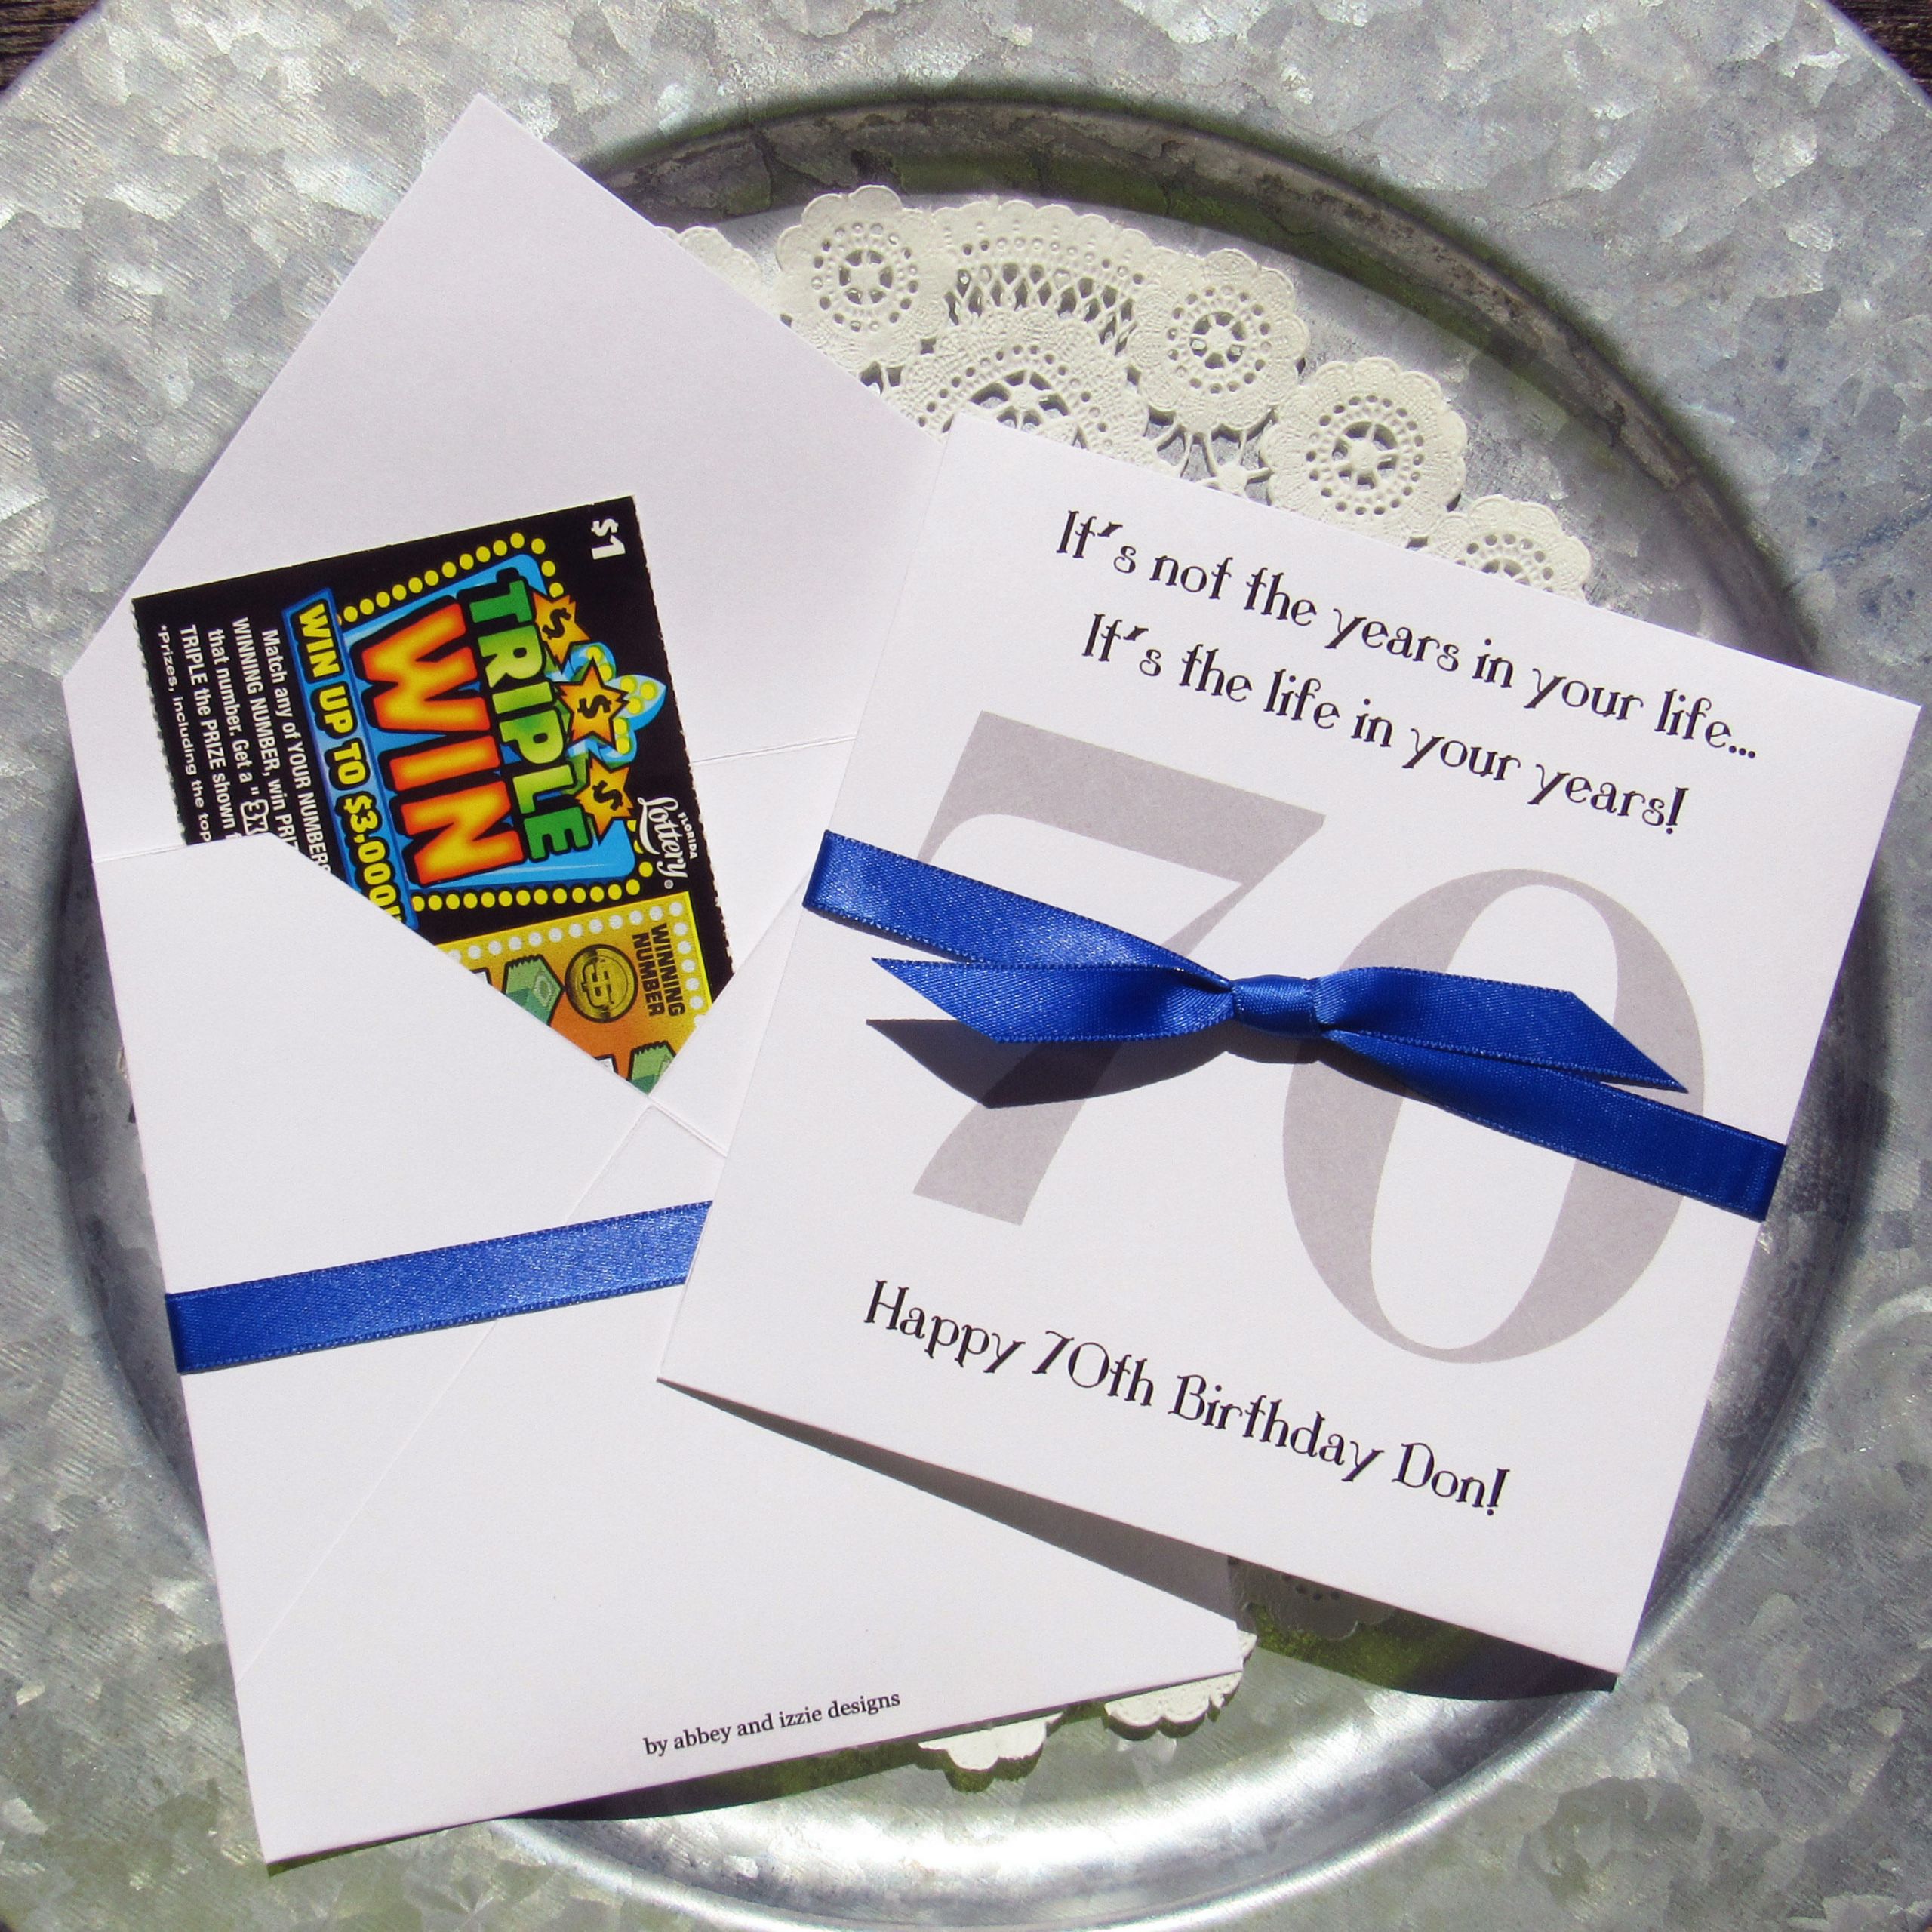 70th Birthday Party Favors
 70th Birthday Party 70th Birthday Favors Adult Birthday